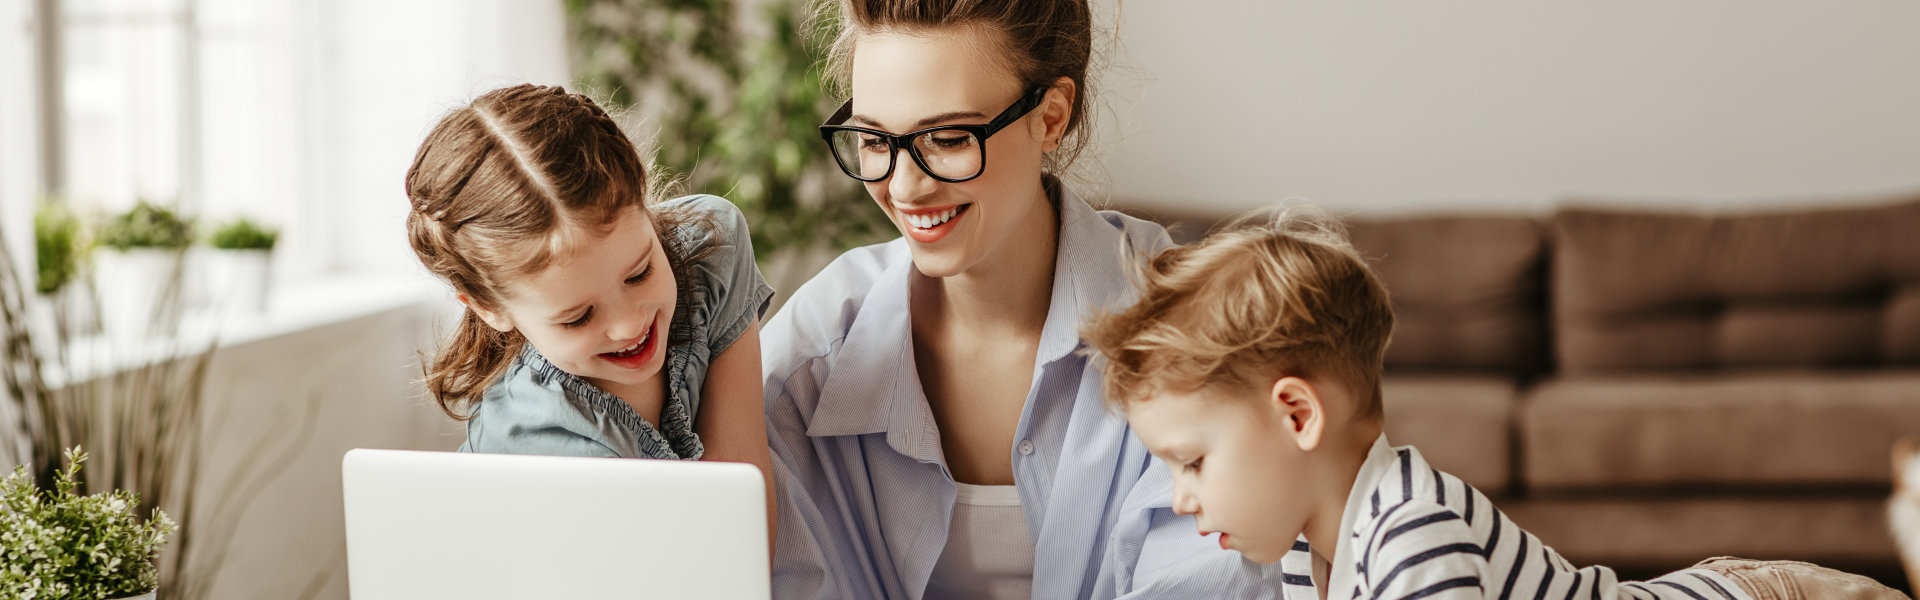 A woman and two children looking at the laptop